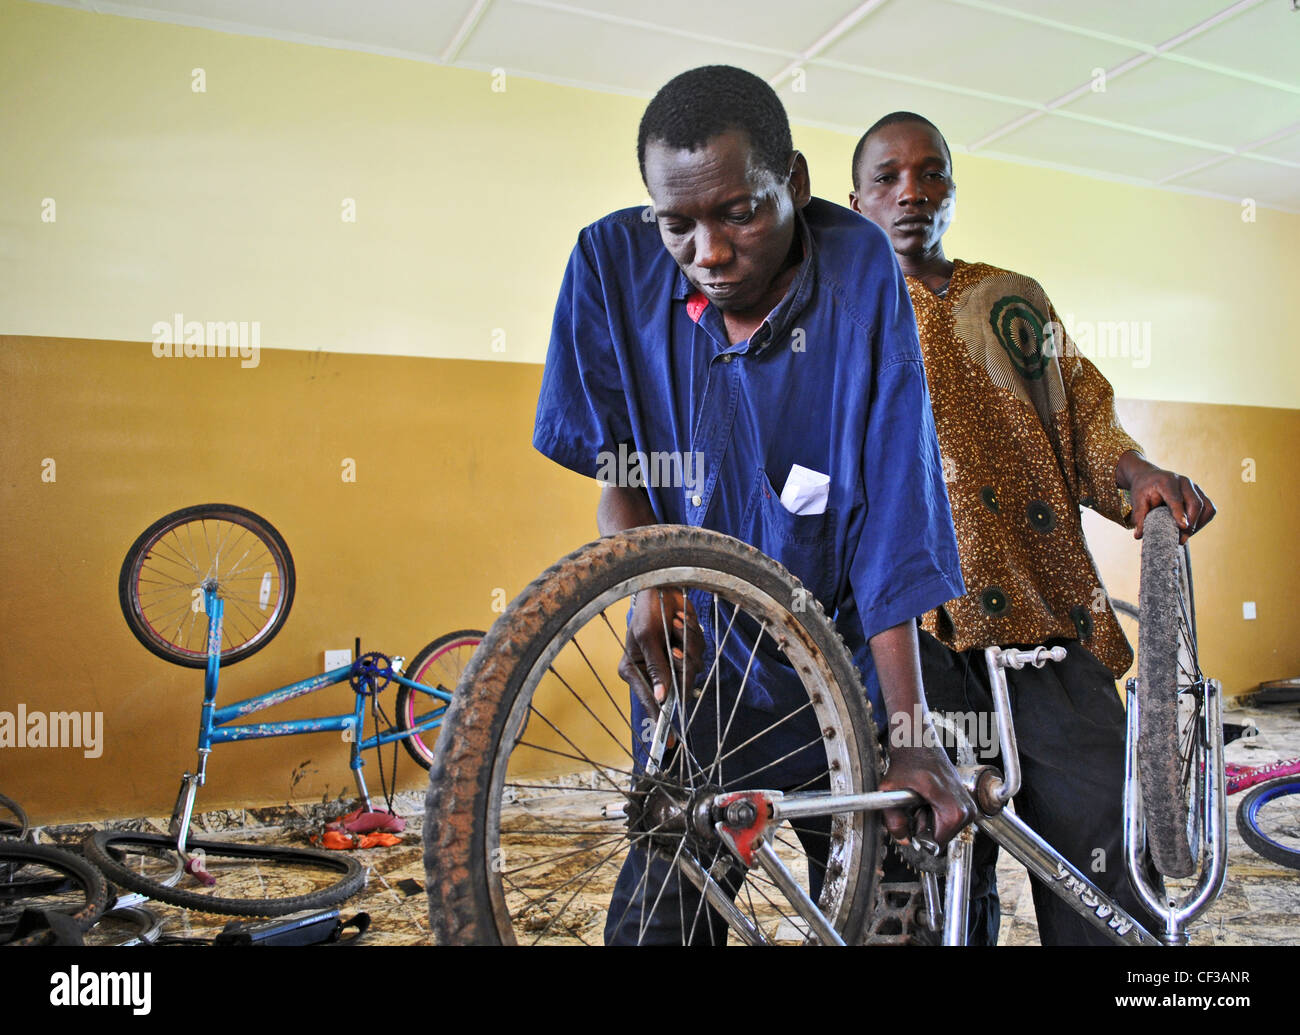 A man with polio working as a bicycle mechanic in a UNDP-funded project in Makeni, Sierra Leone Stock Photo